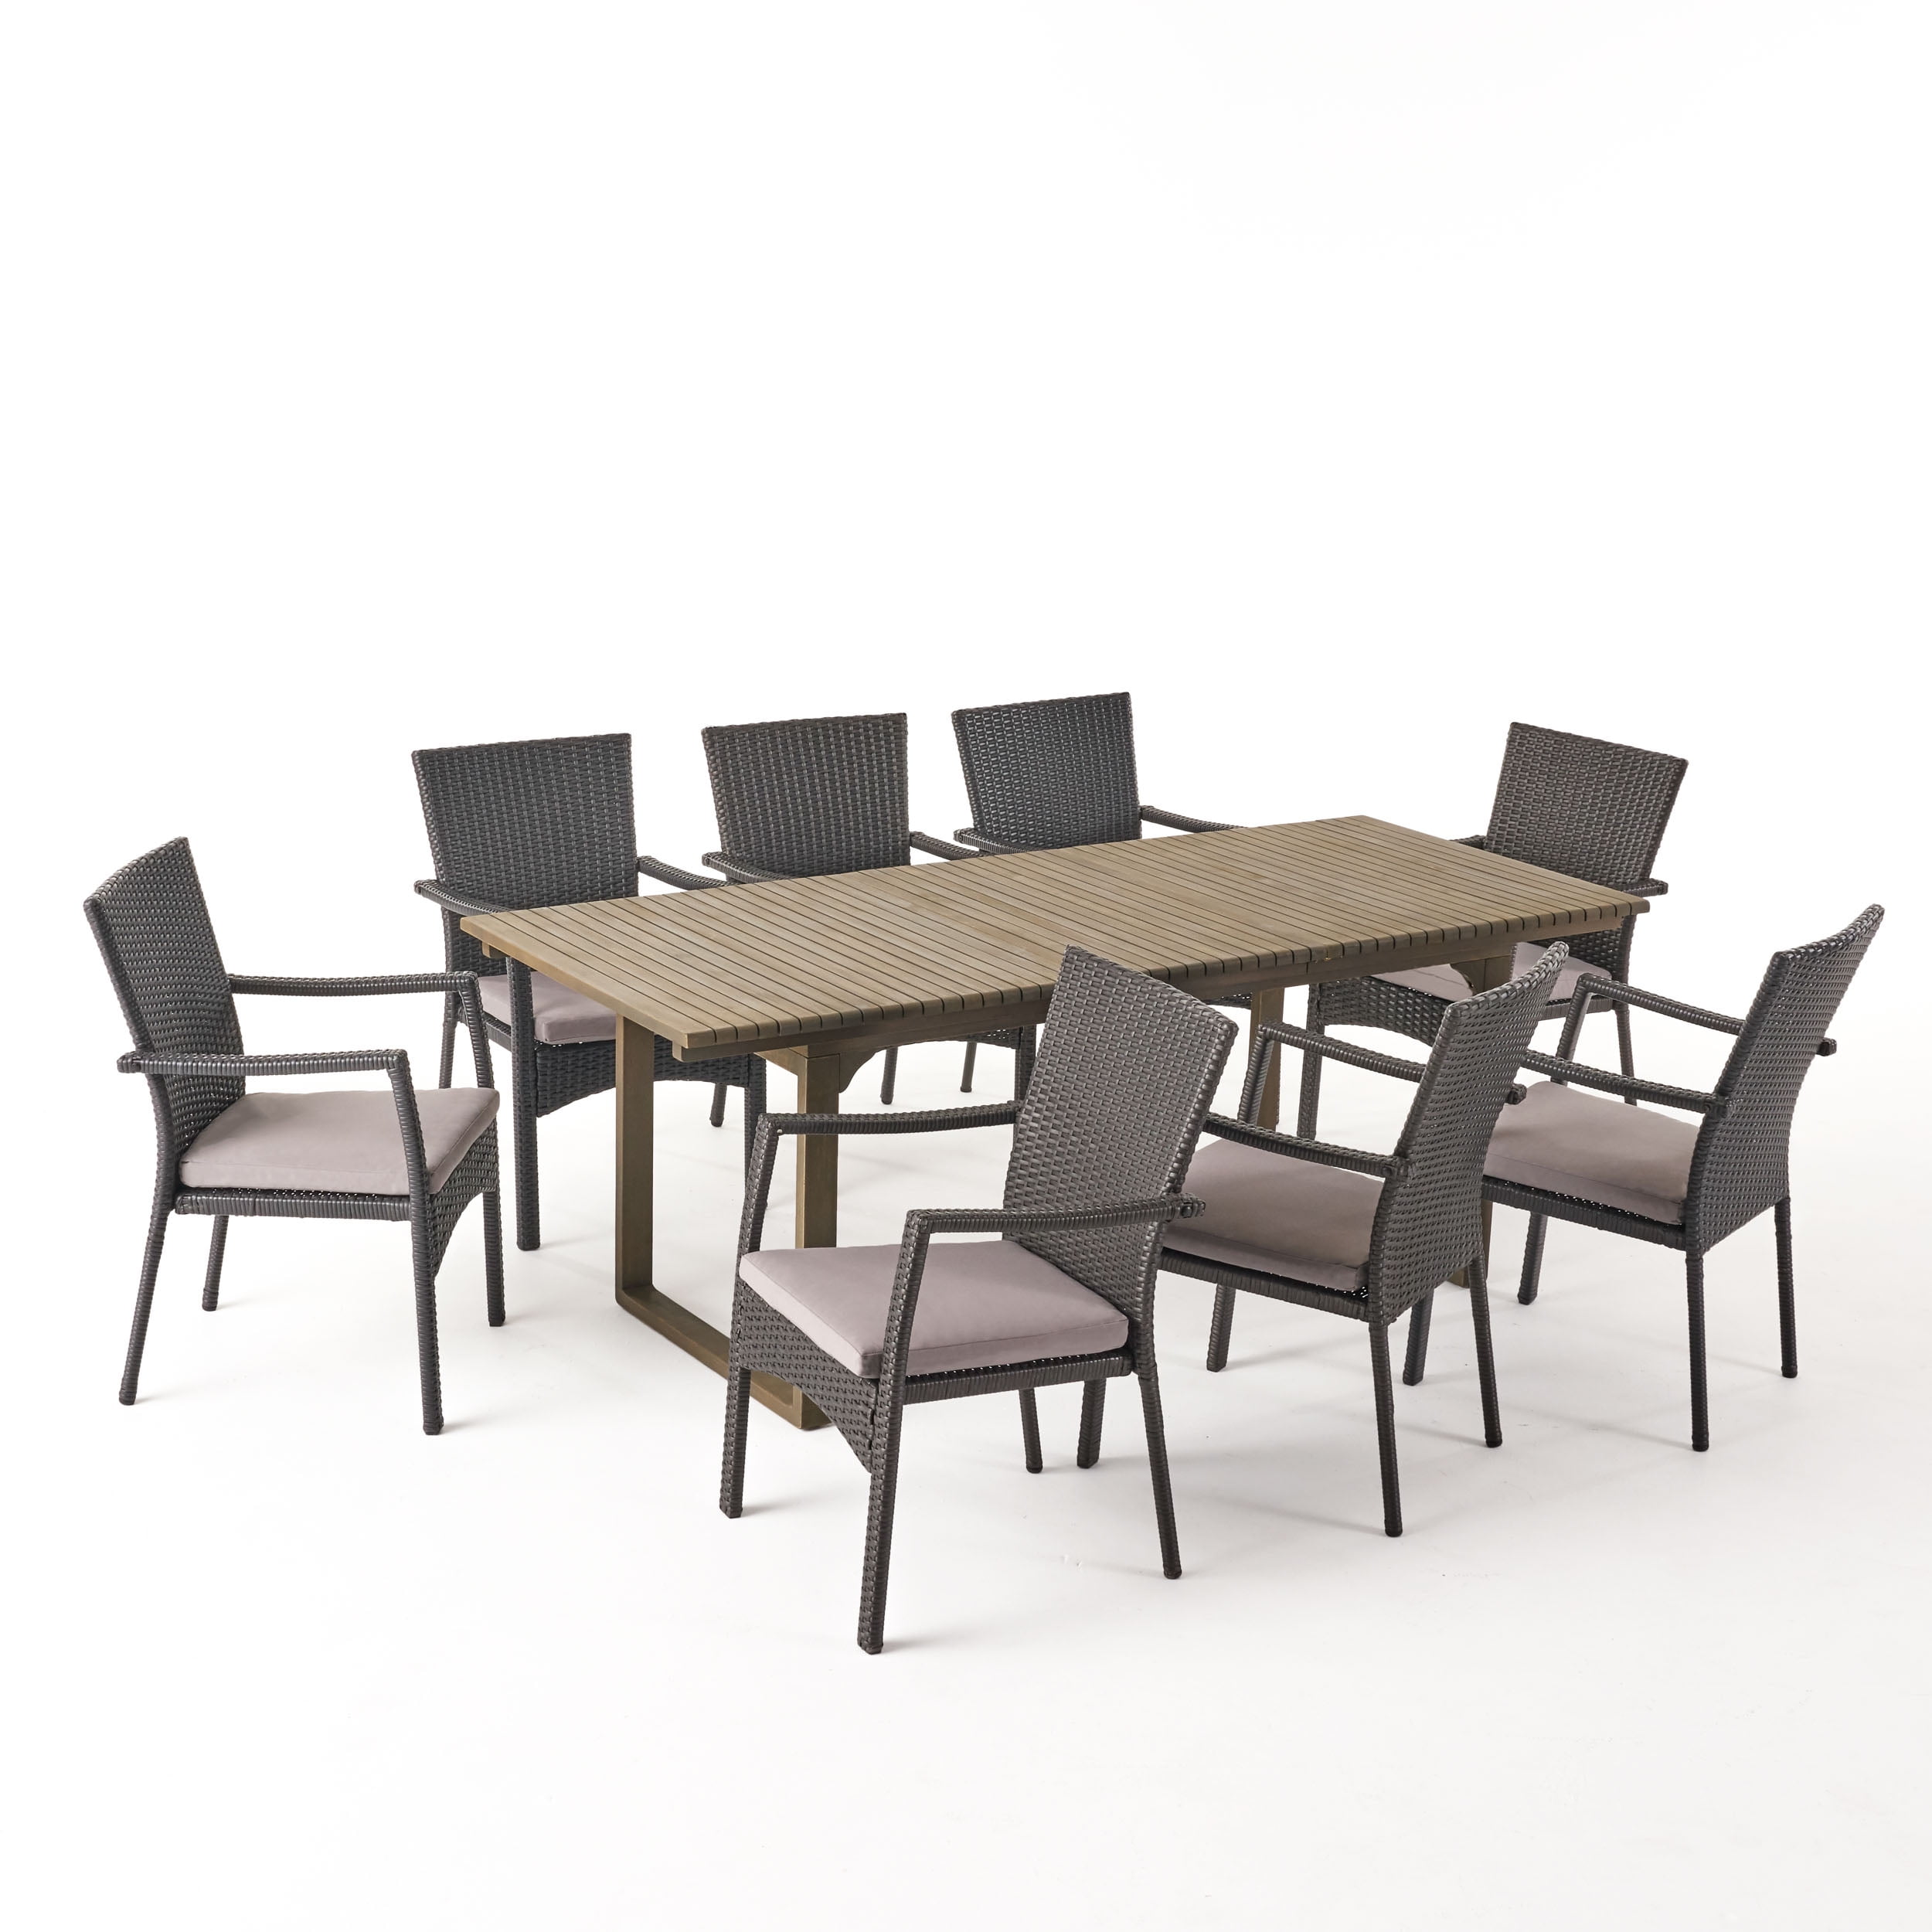 Rst Brands Deco 9 Piece Patio Dining, Deco 9 Piece Wicker Patio Dining Set With Gray Cushions